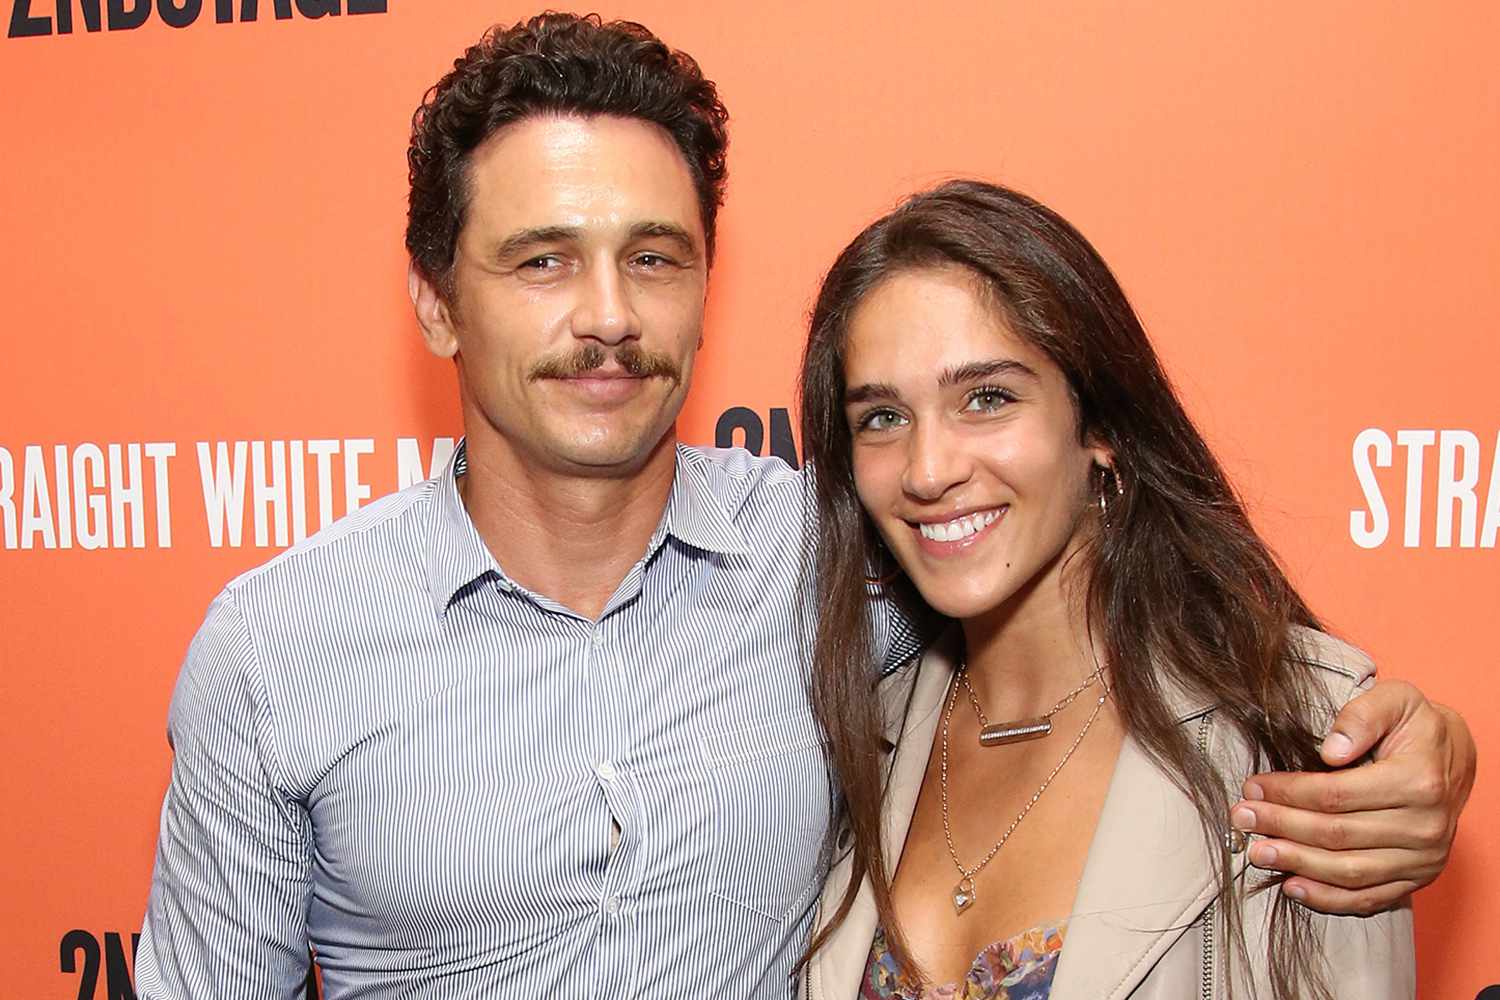 James Franco Says He 'Cheated On Everyone' He Dated Before Girlfriend Isabel Pakzad